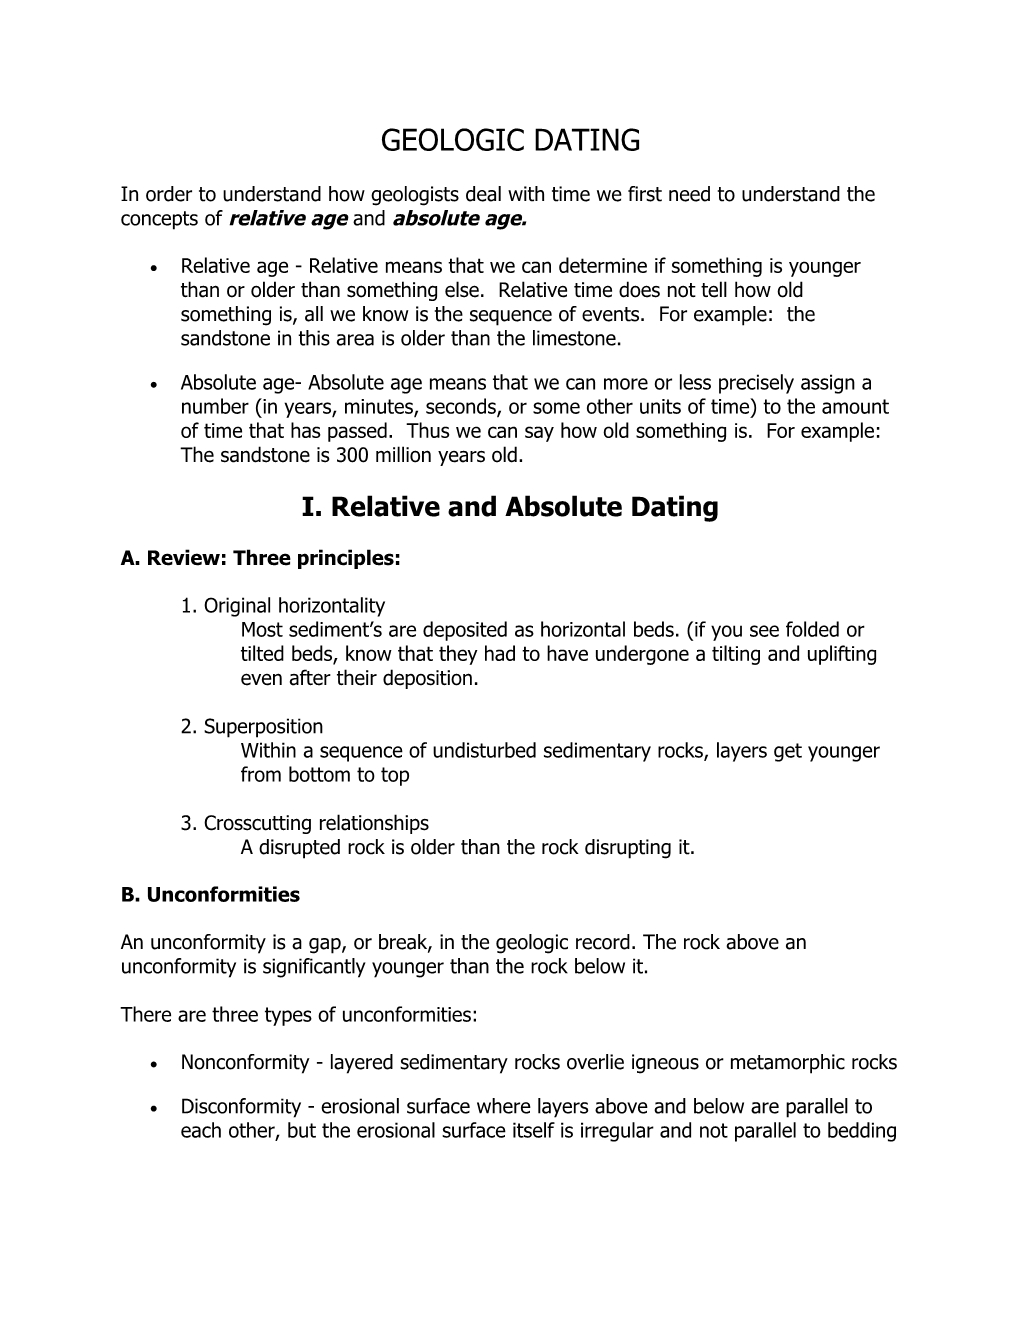 I. Relative and Absolute Dating